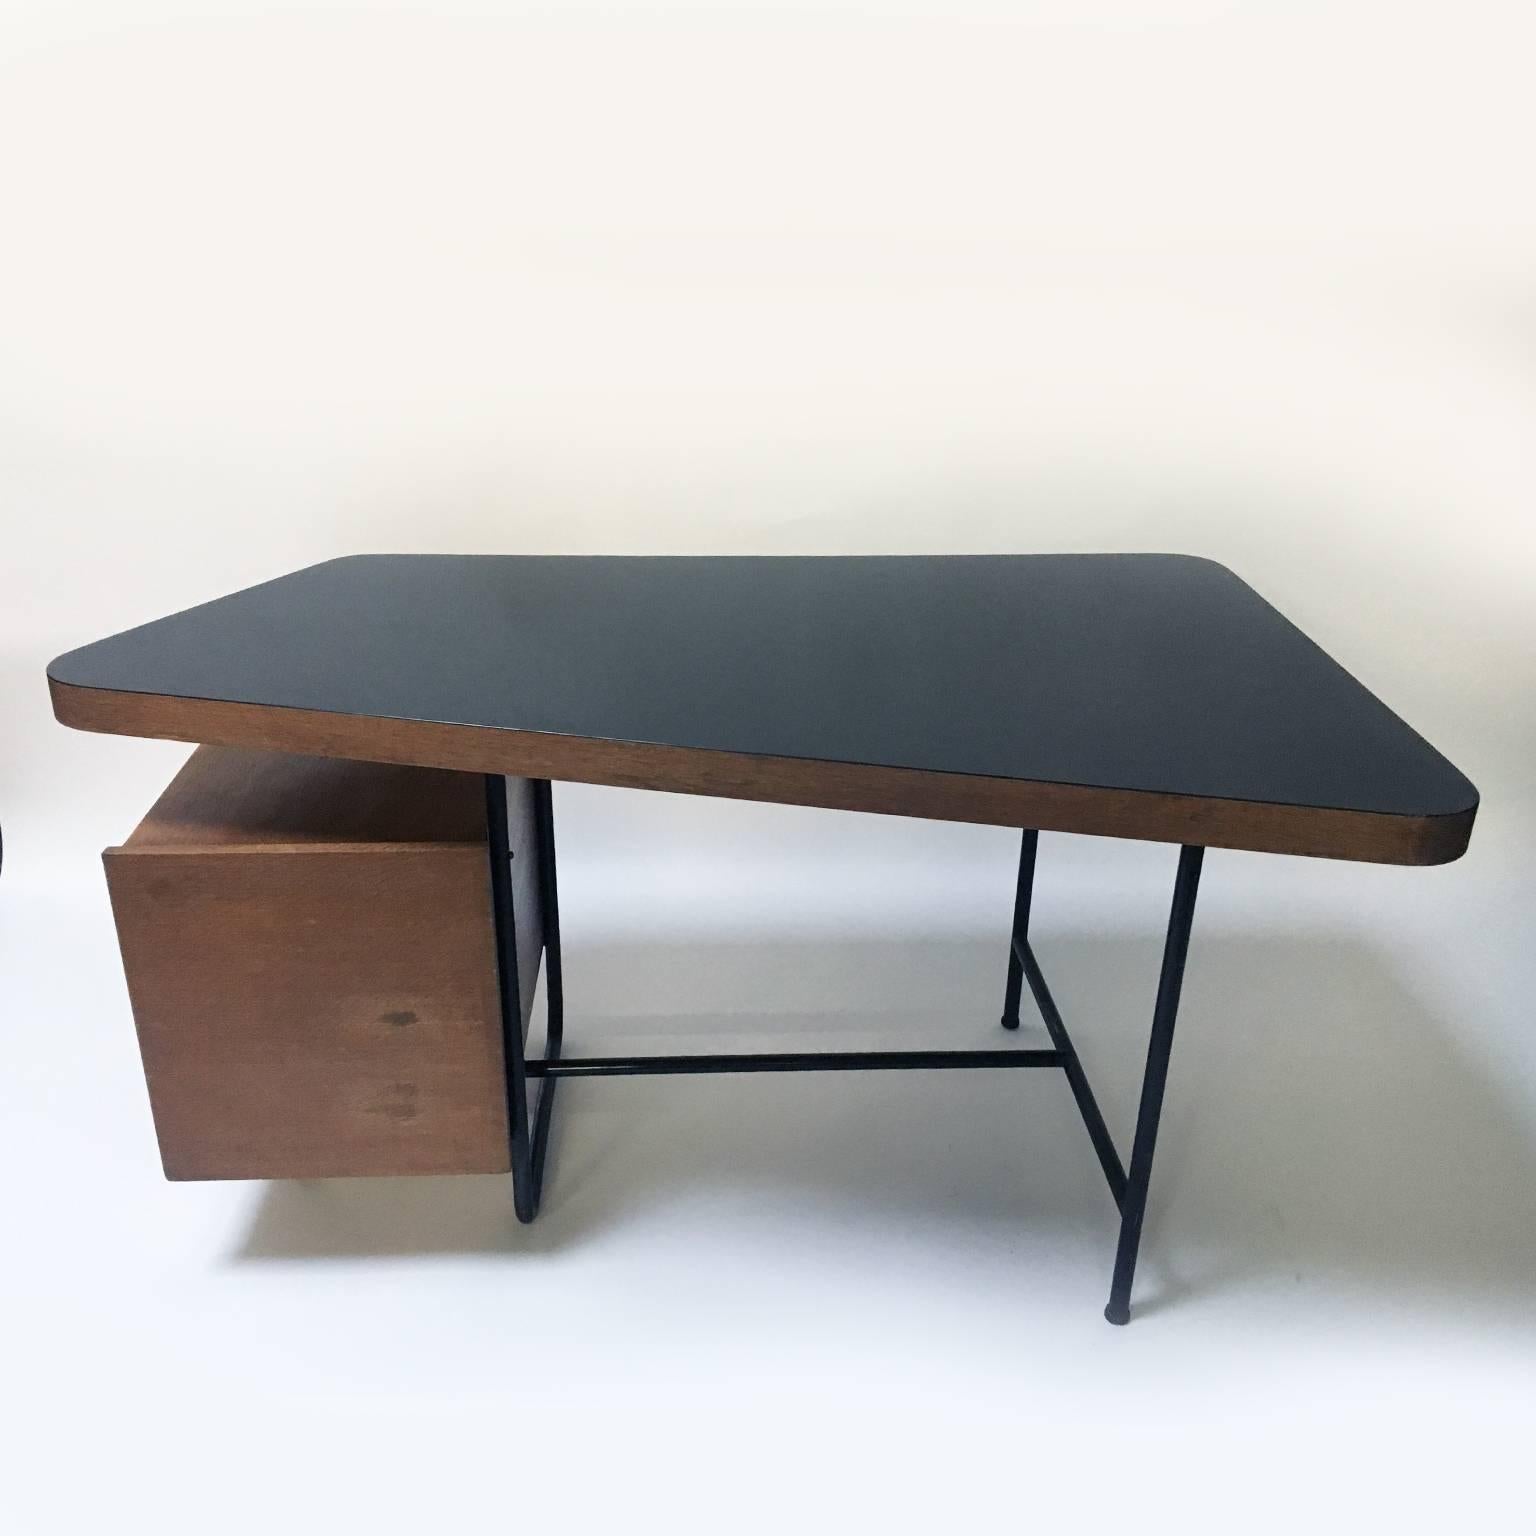 Adorable little writing desk in the style of Pierre Guariche.

Oak desk with black formica desktop, steel structure and a chest of drawers with brass details.